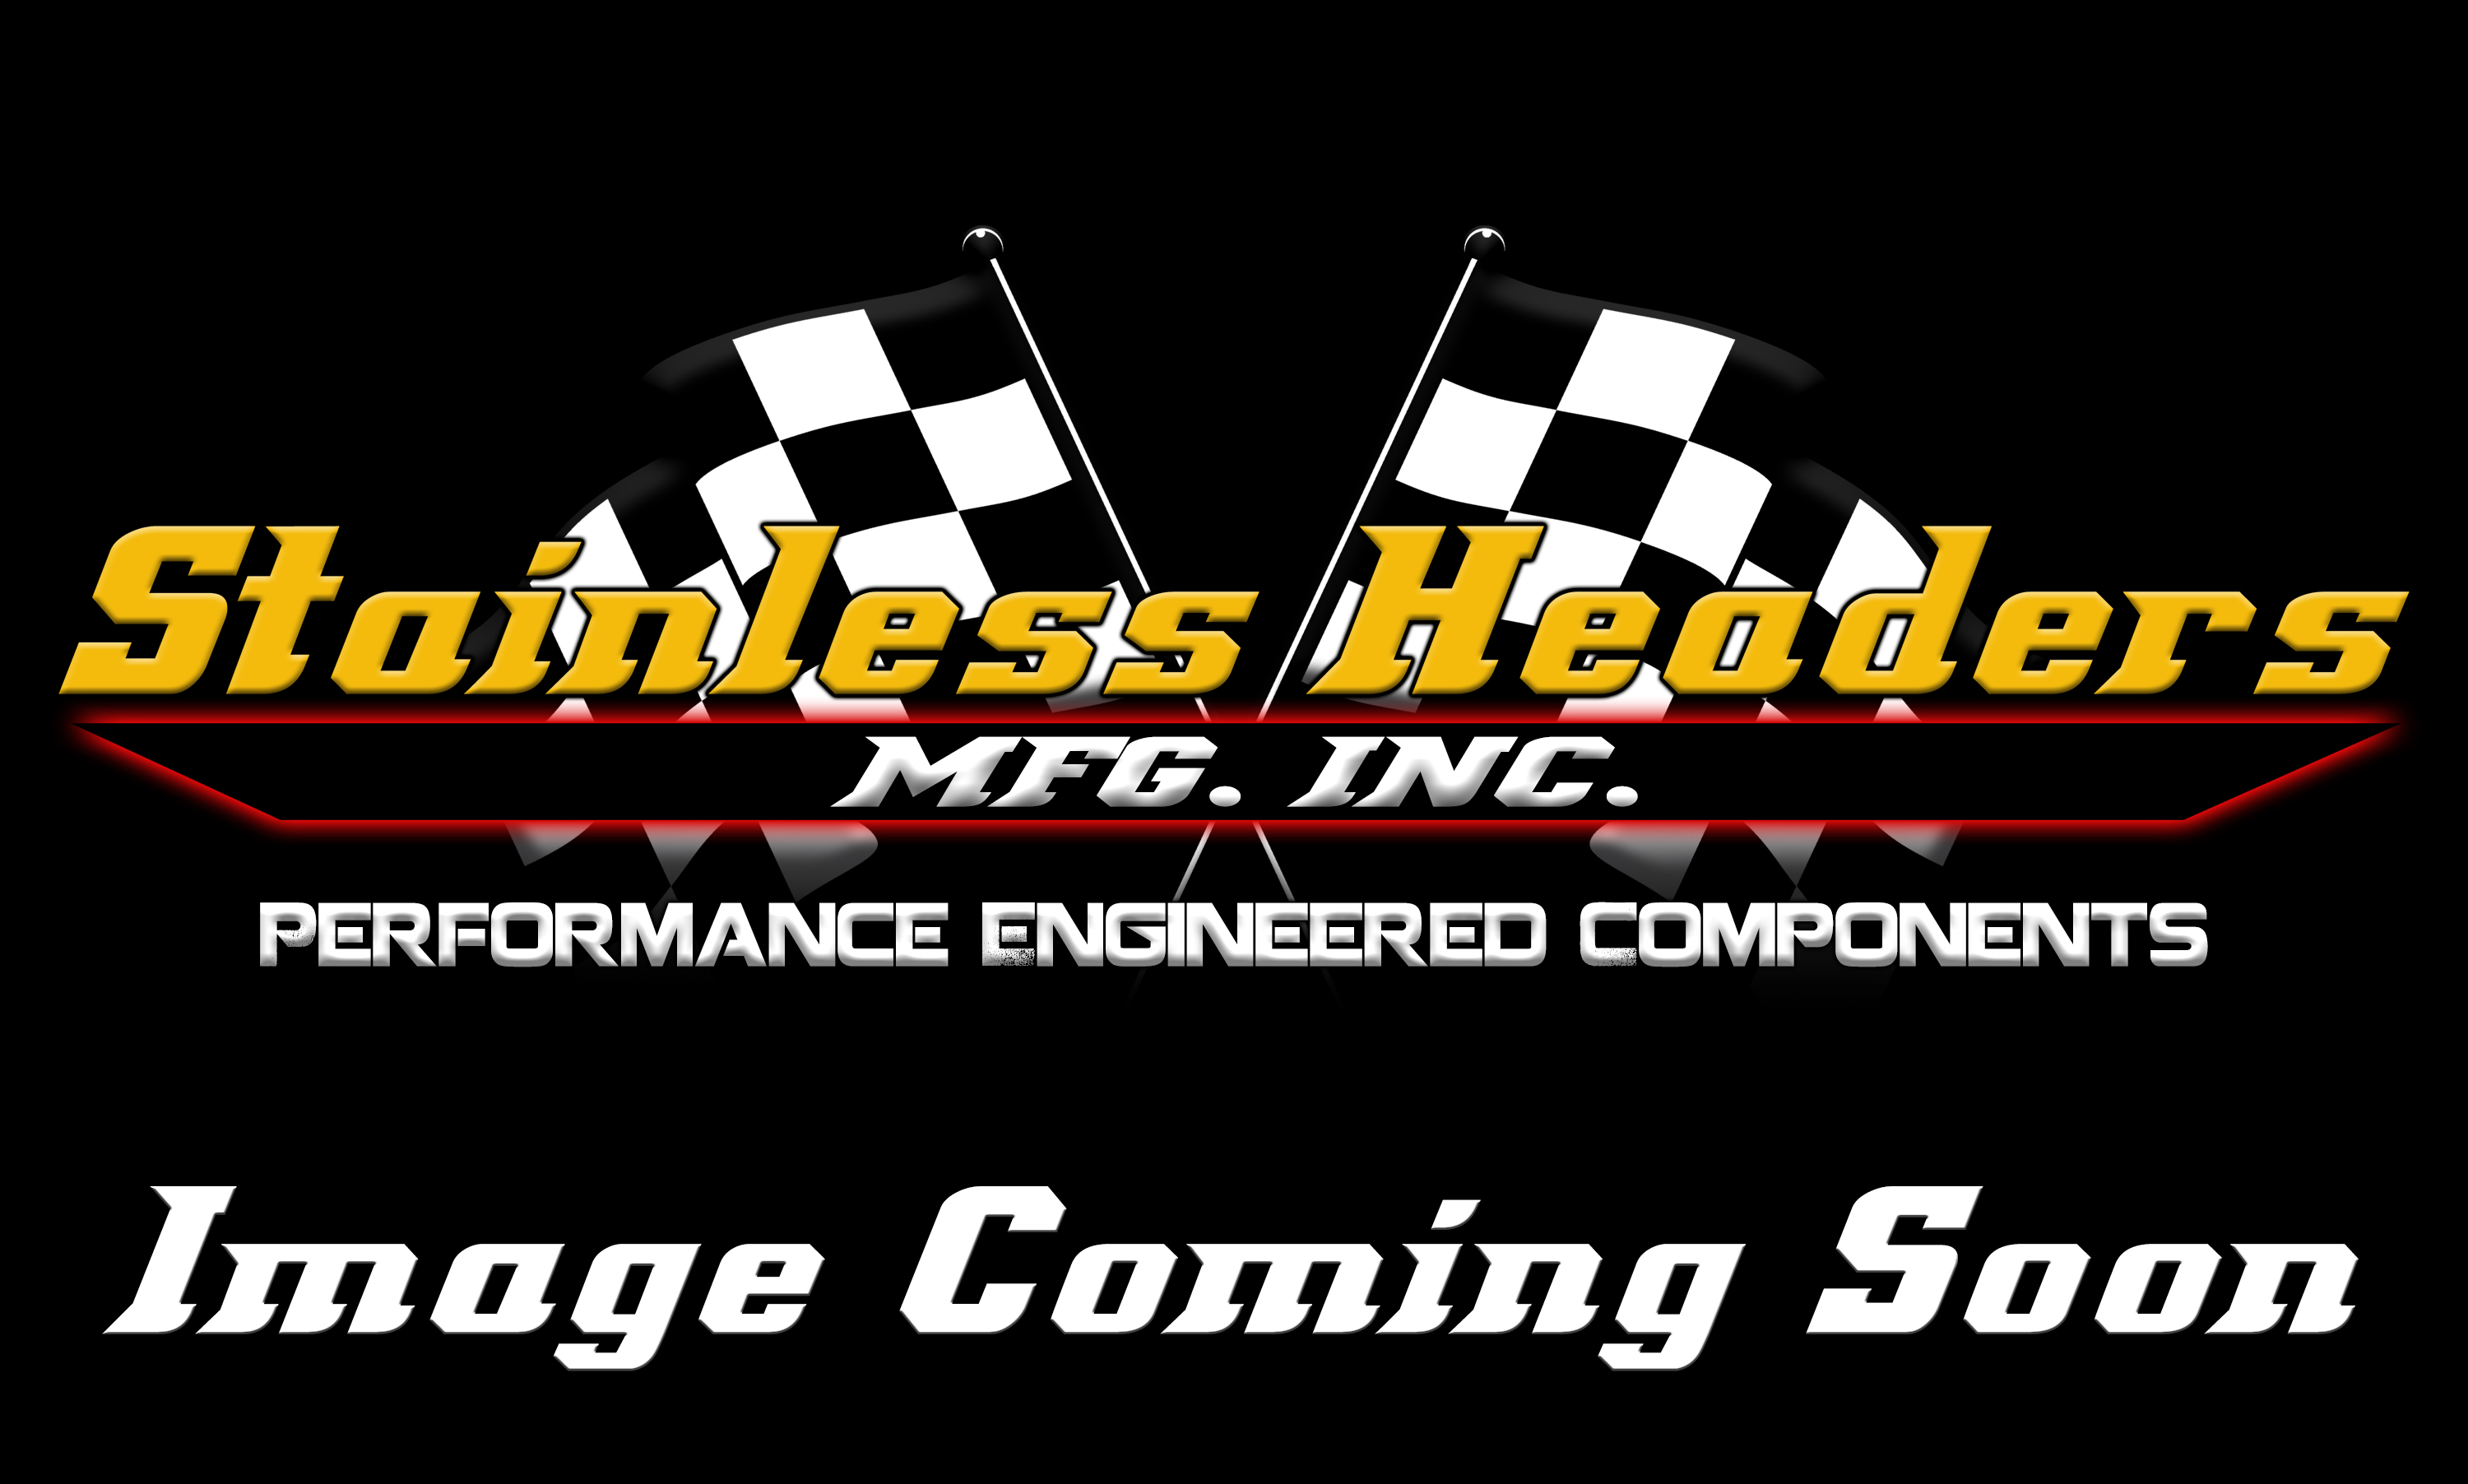 Stainless Headers - 1 1/2" Primary 5 into 1 Performance Merge Collector-16ga 304ss